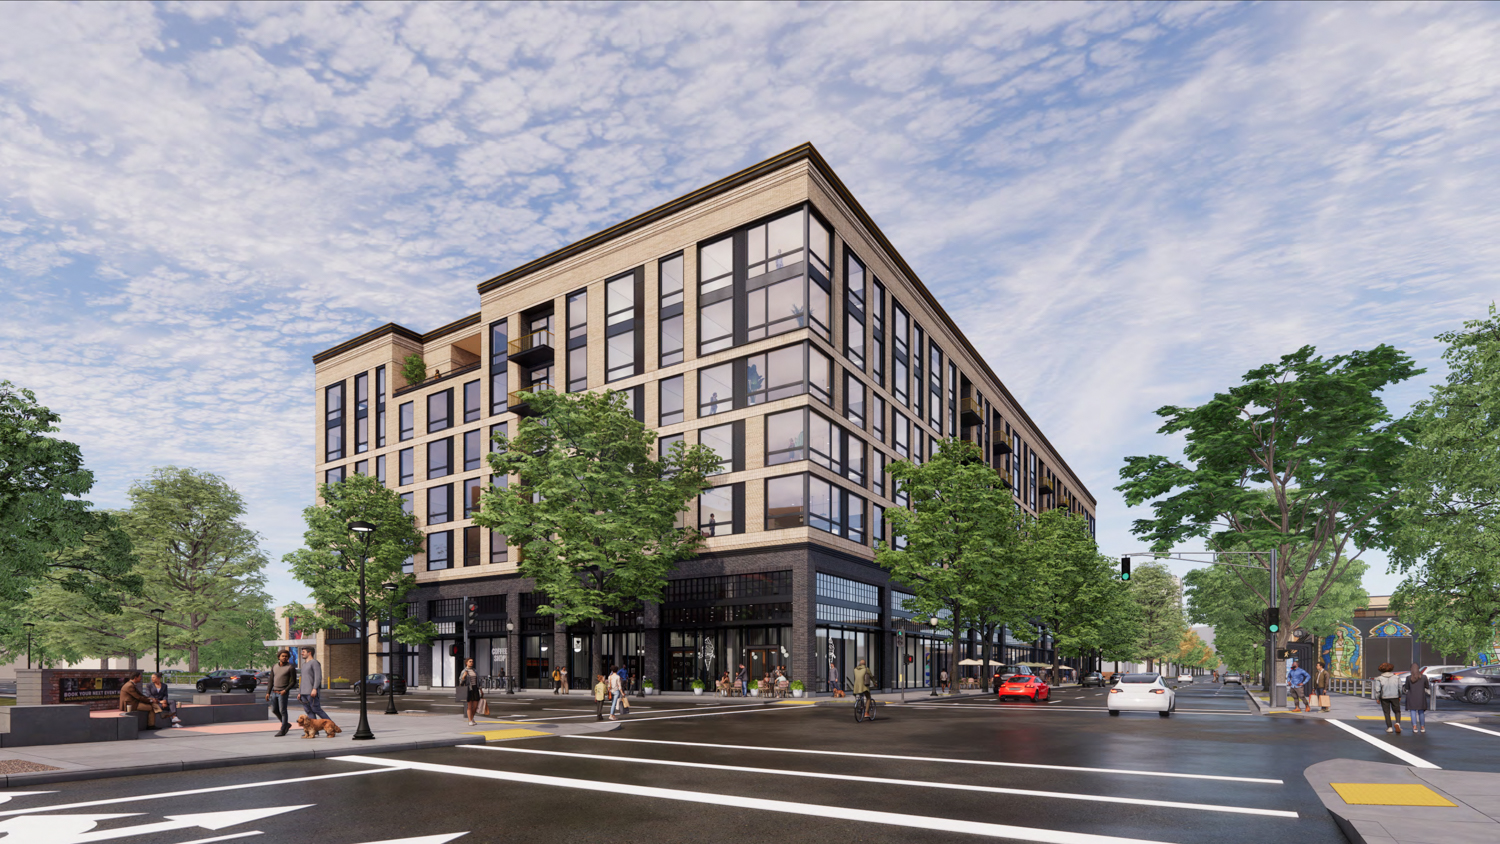 16th and J Street, rendering by C2K Architecture